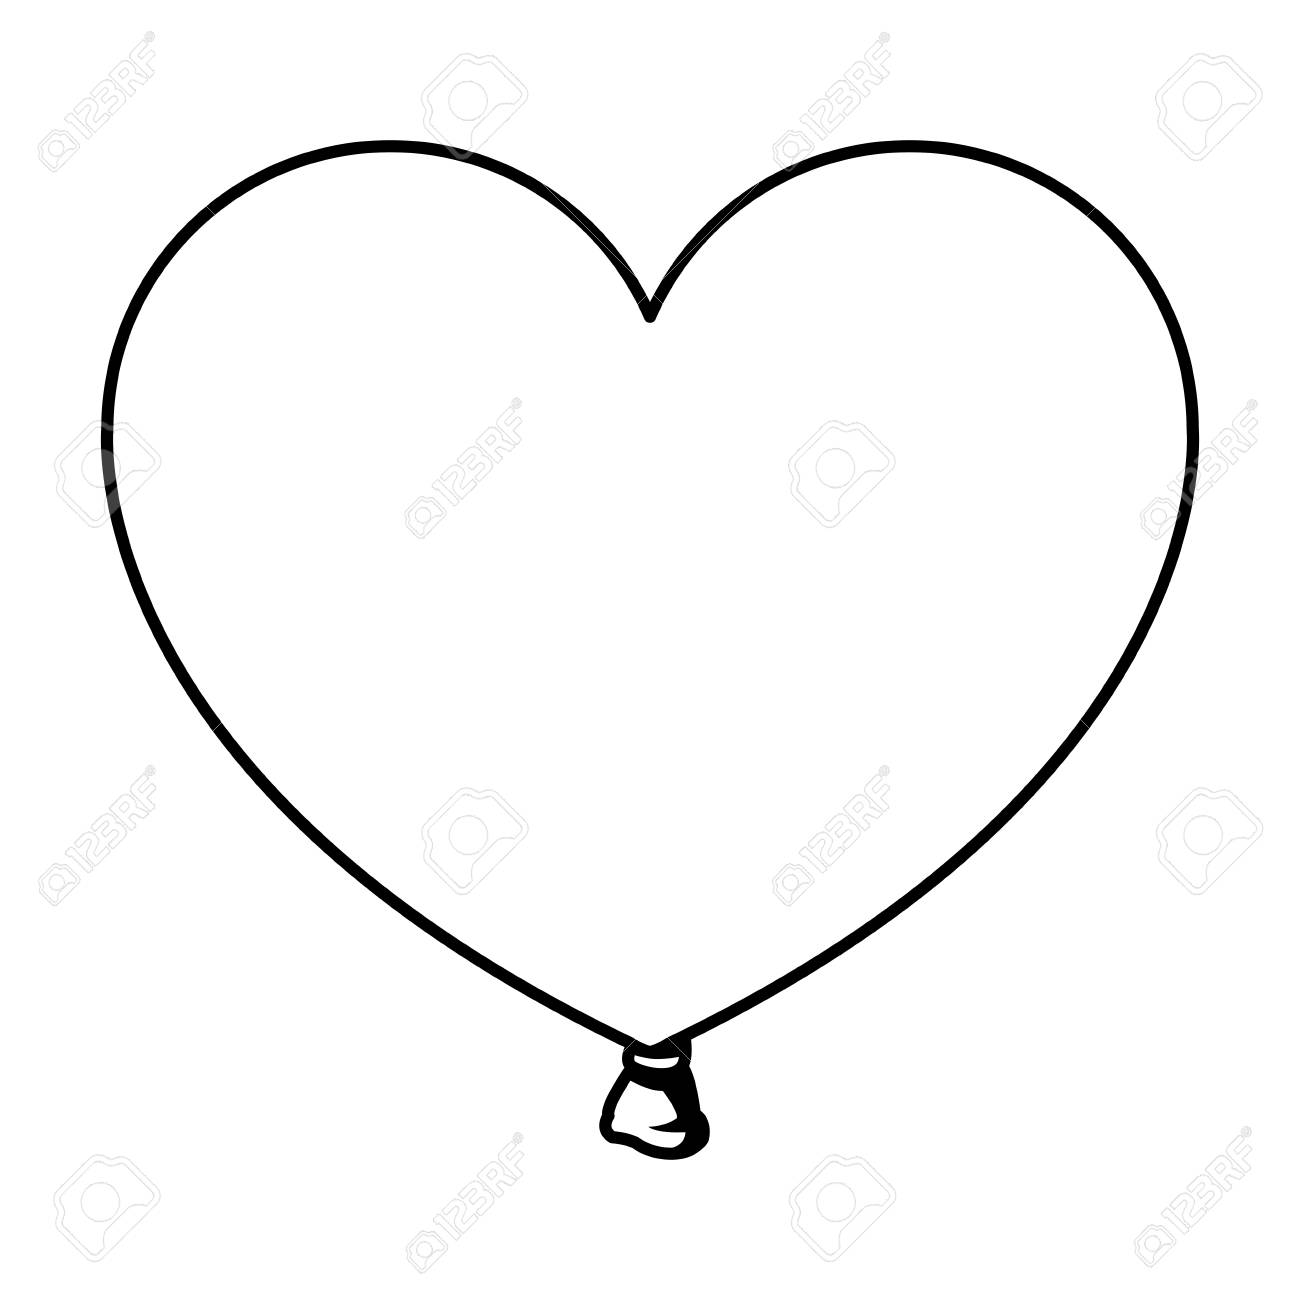 Heart shaped balloon in black and white vector illustration graphic...